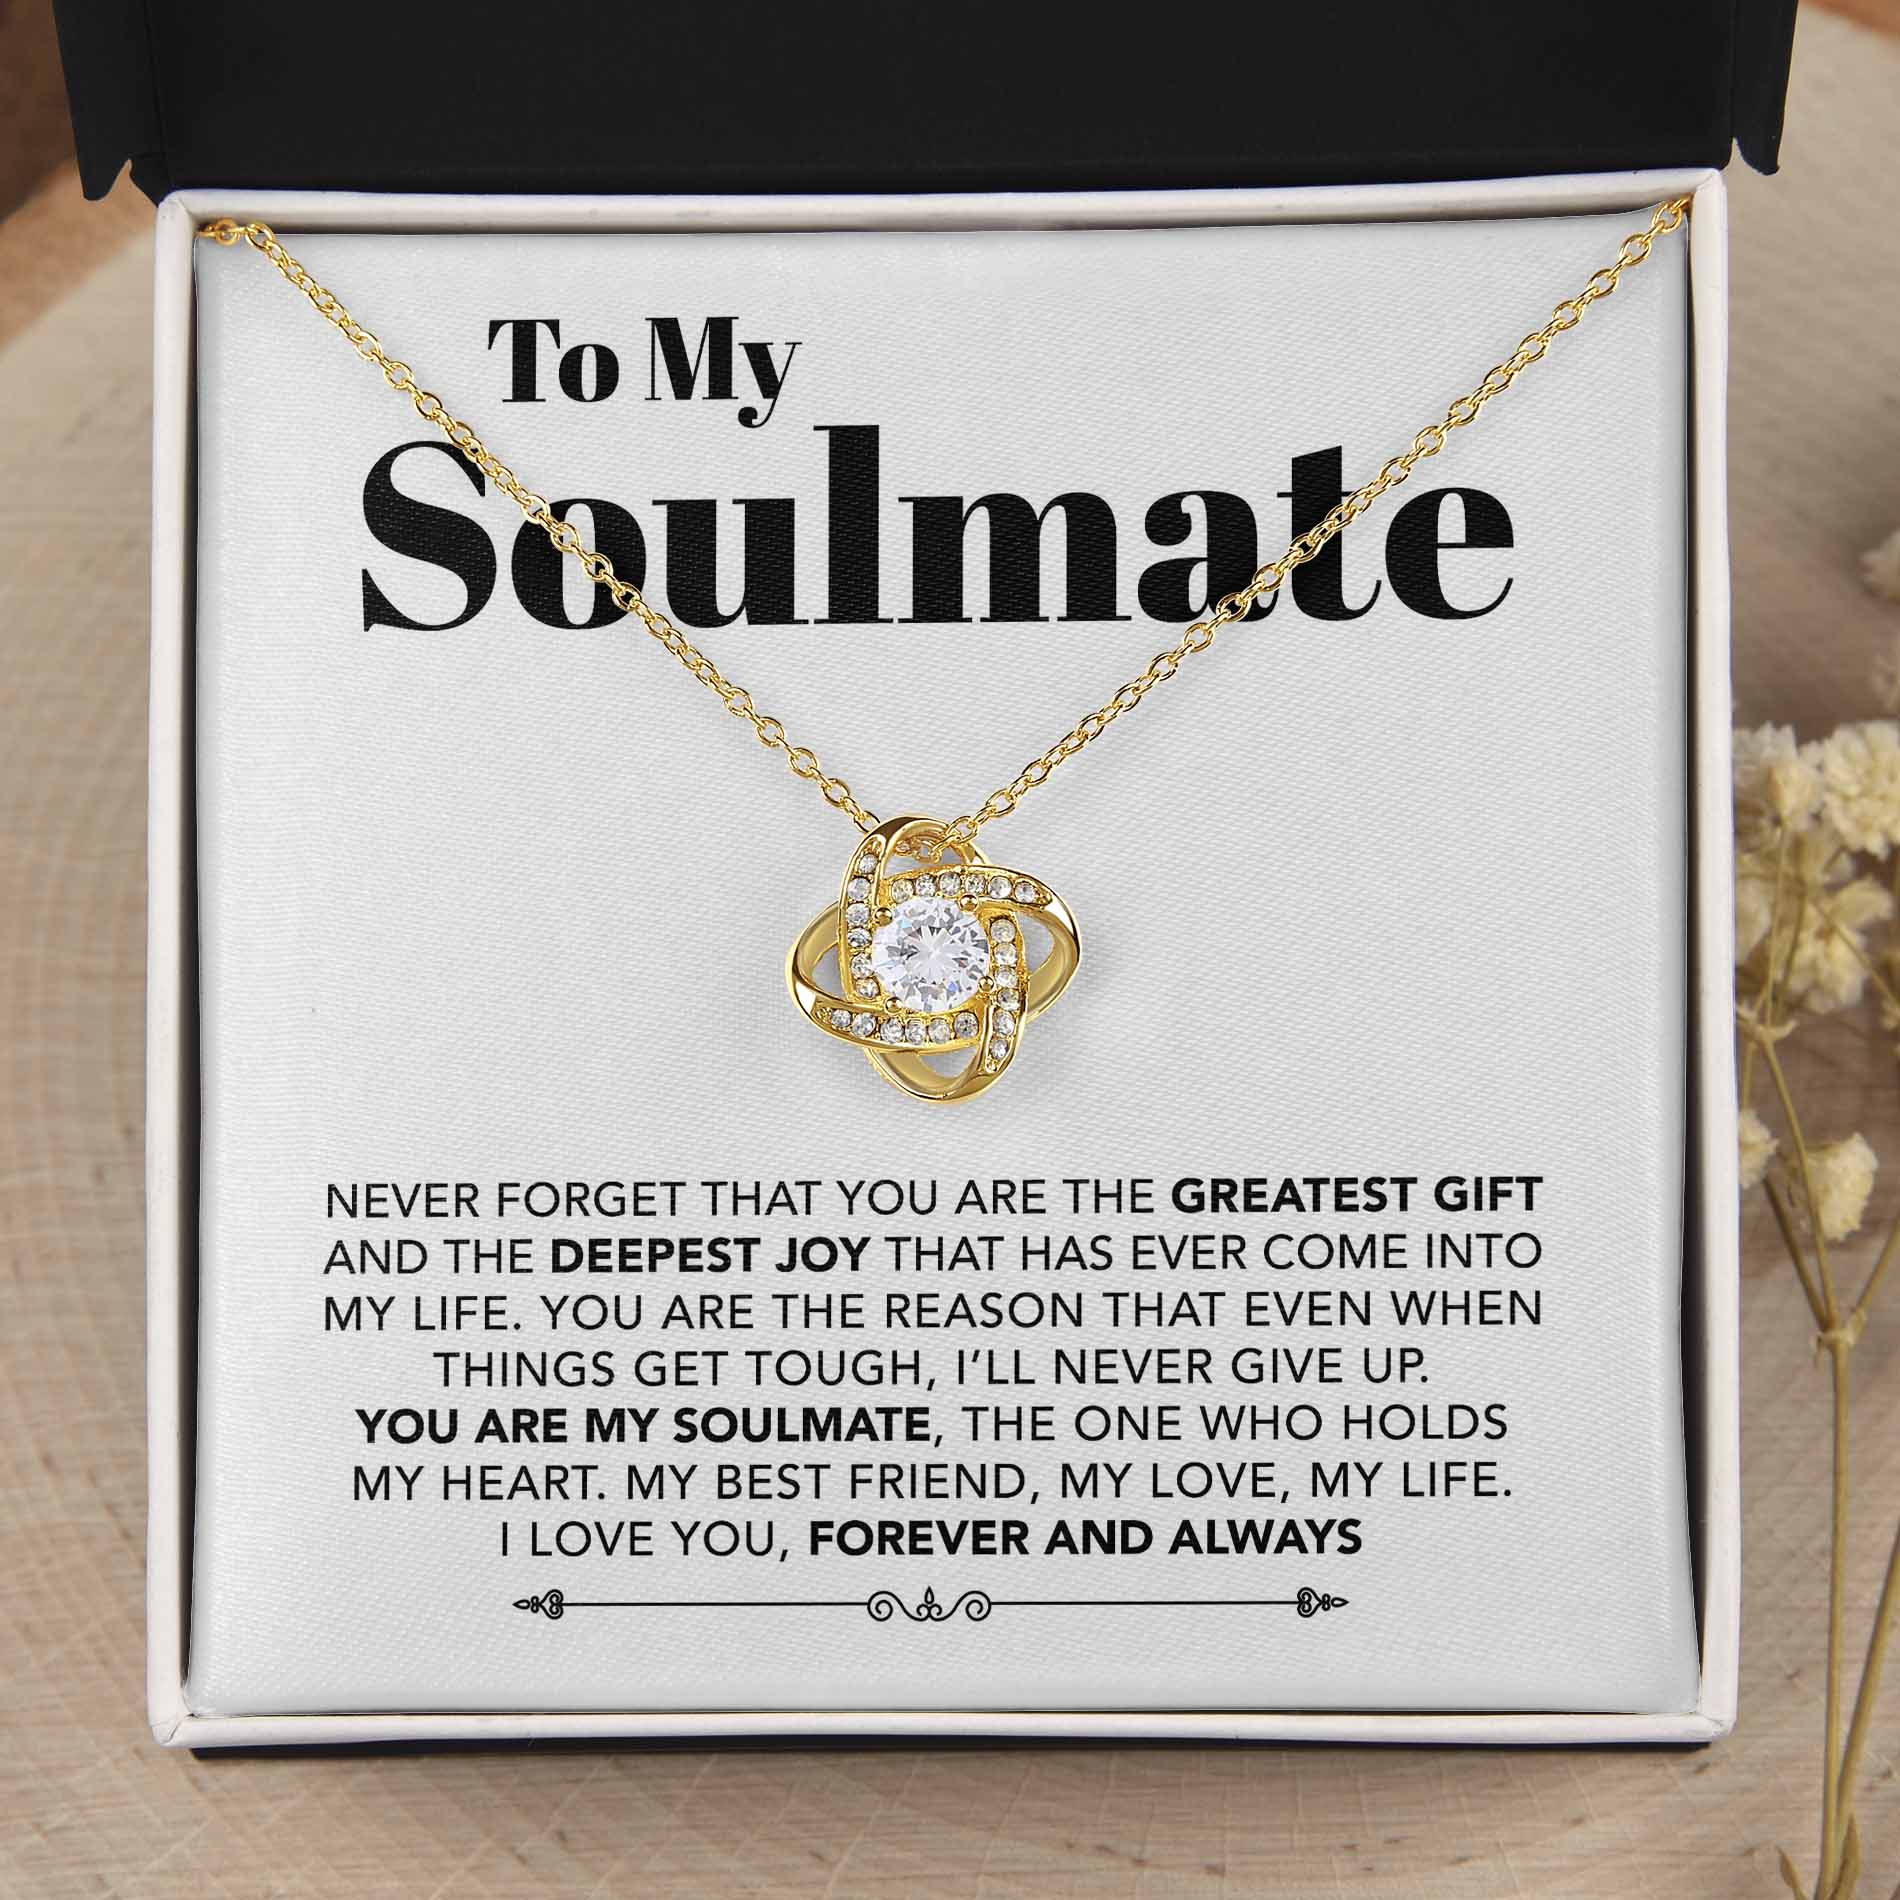 ShineOn Fulfillment Jewelry 18K Yellow Gold Finish / Standard Box To My Soulmate - My Love, My Life - Love Knot Necklace